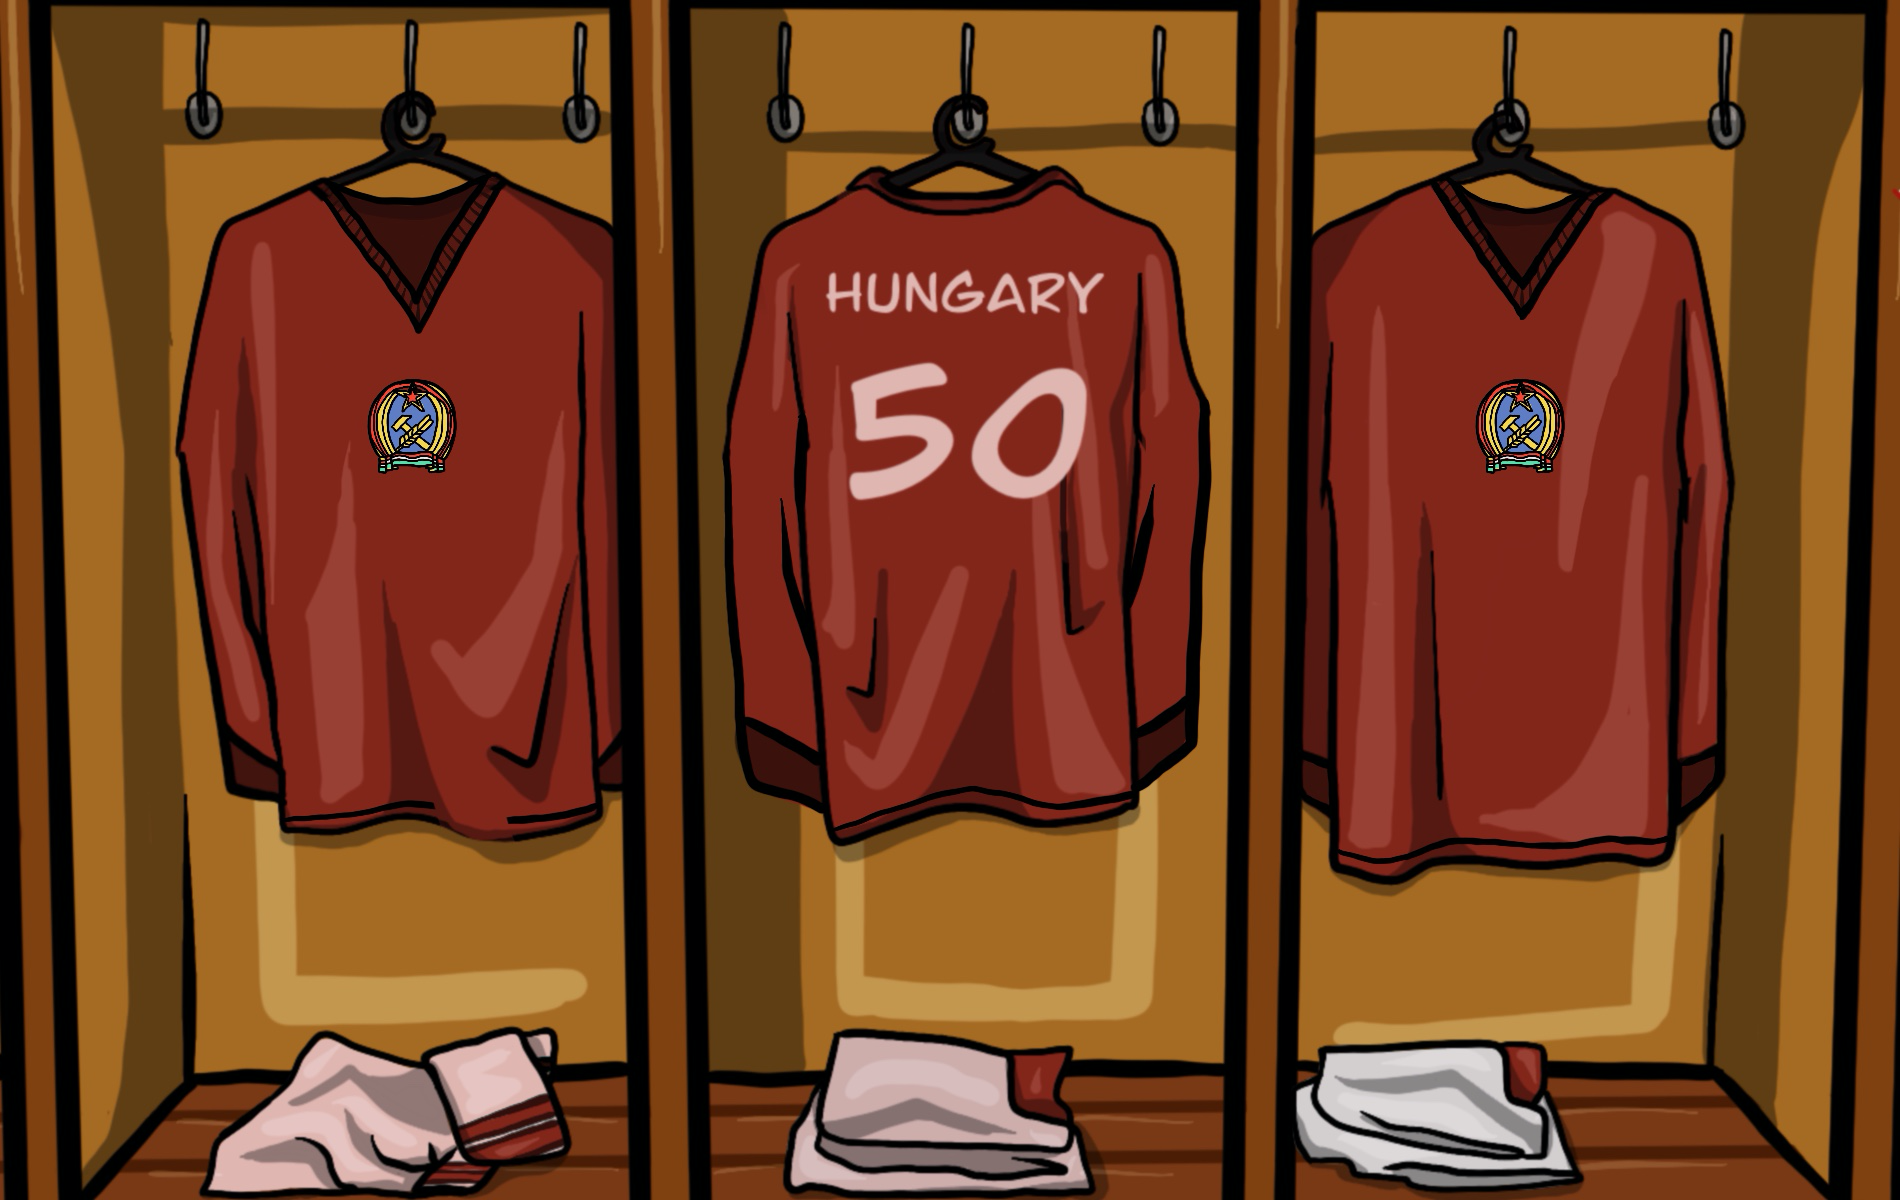 Hungary shirts in a dressing room